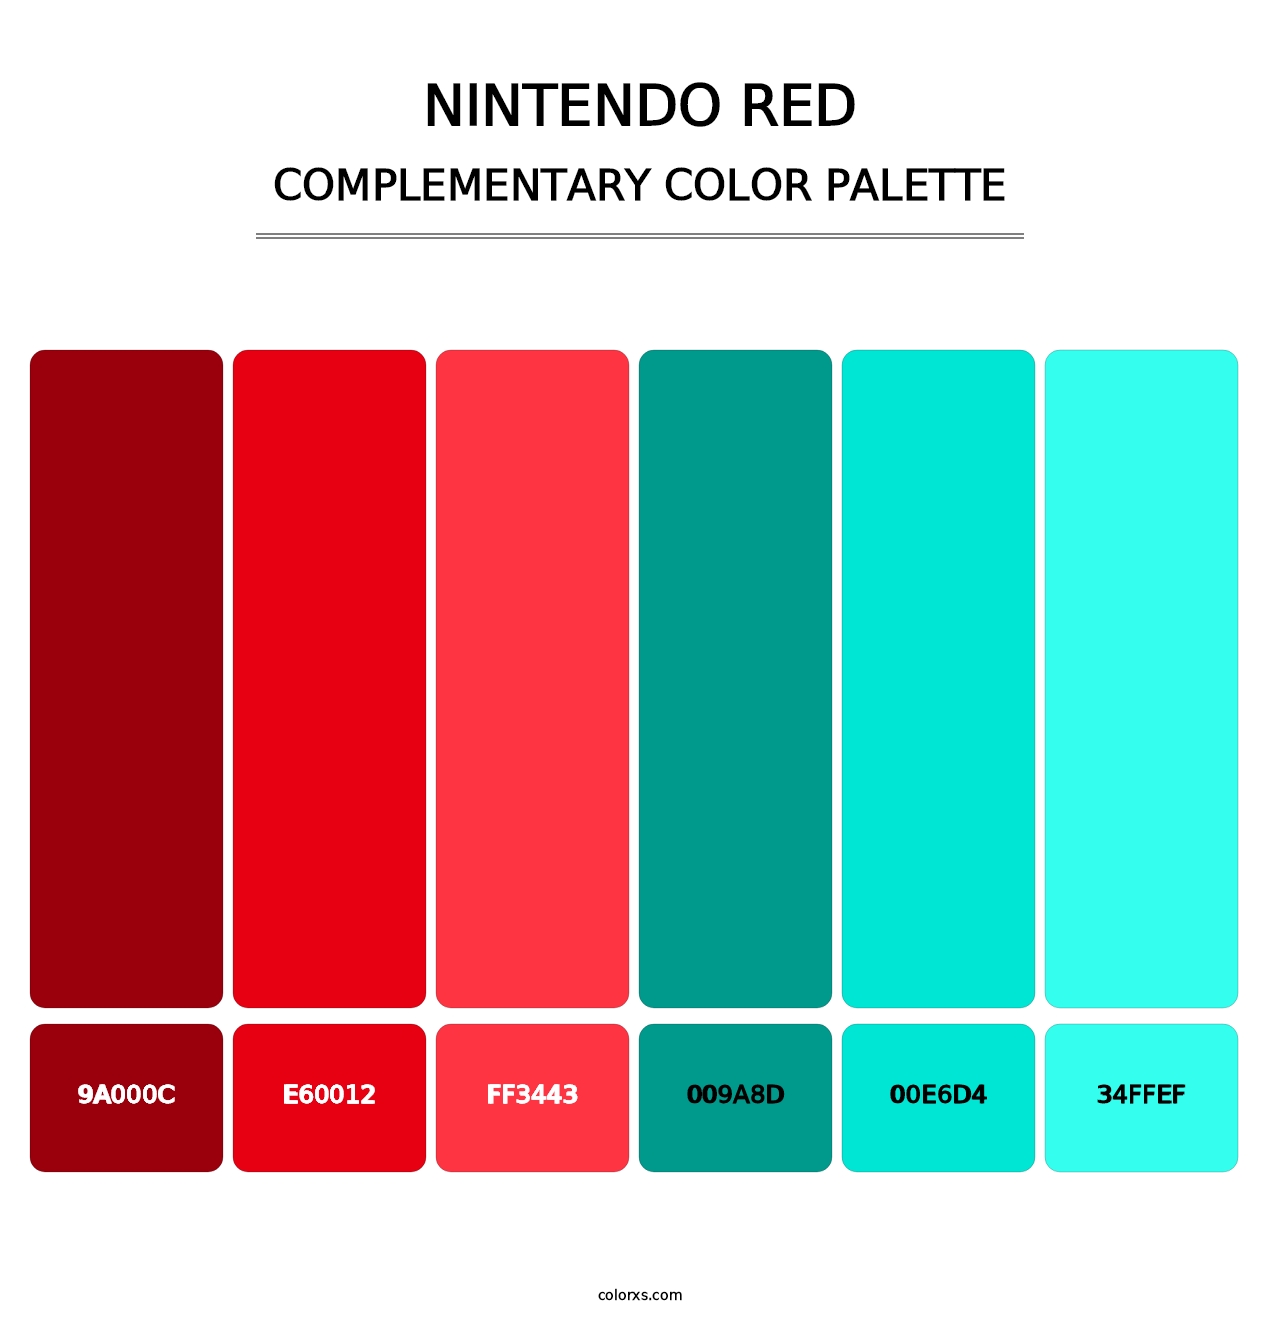 Nintendo Red - Complementary Color Palette